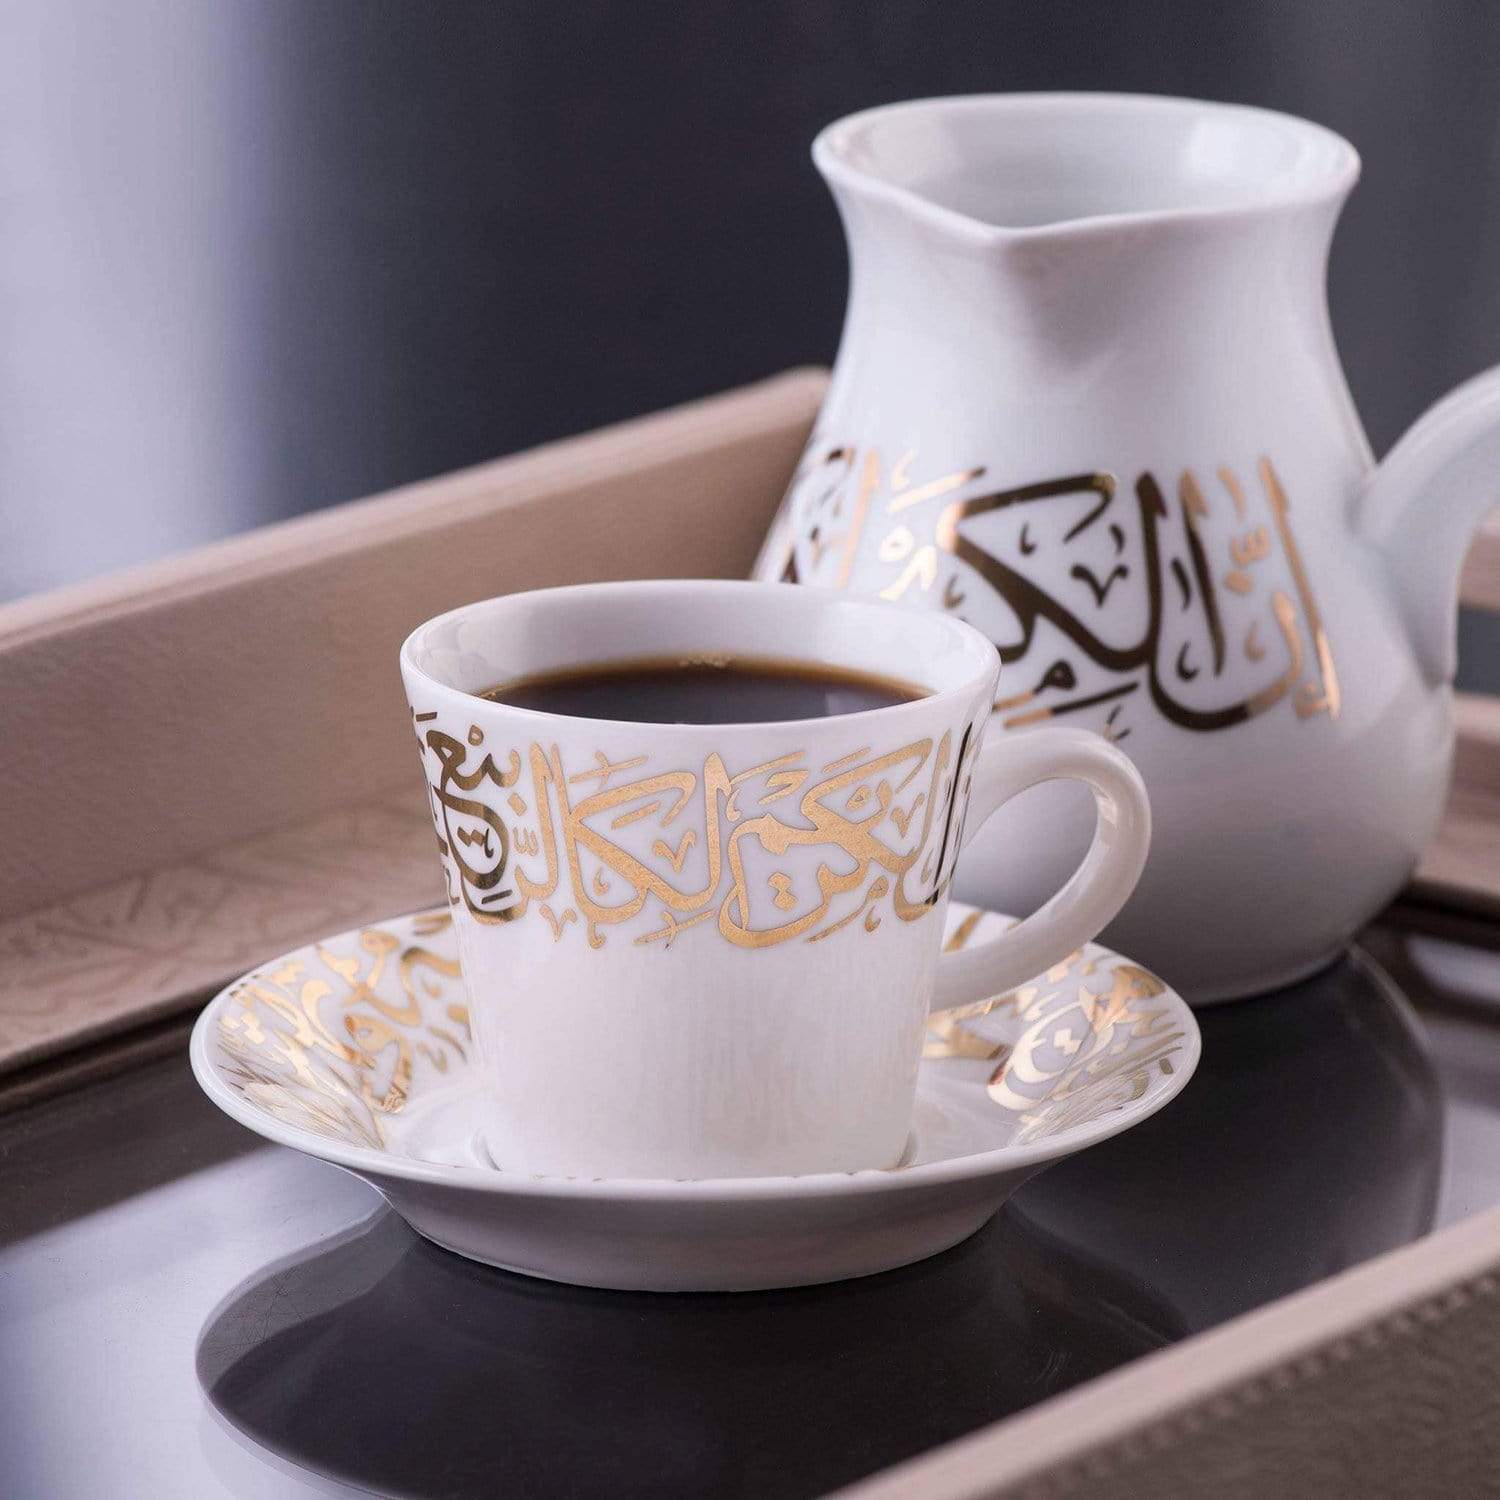 Dimlaj Kareem Coffee Cup and Saucer Set - White and Gold, 12 Pieces - 46666 - Jashanmal Home